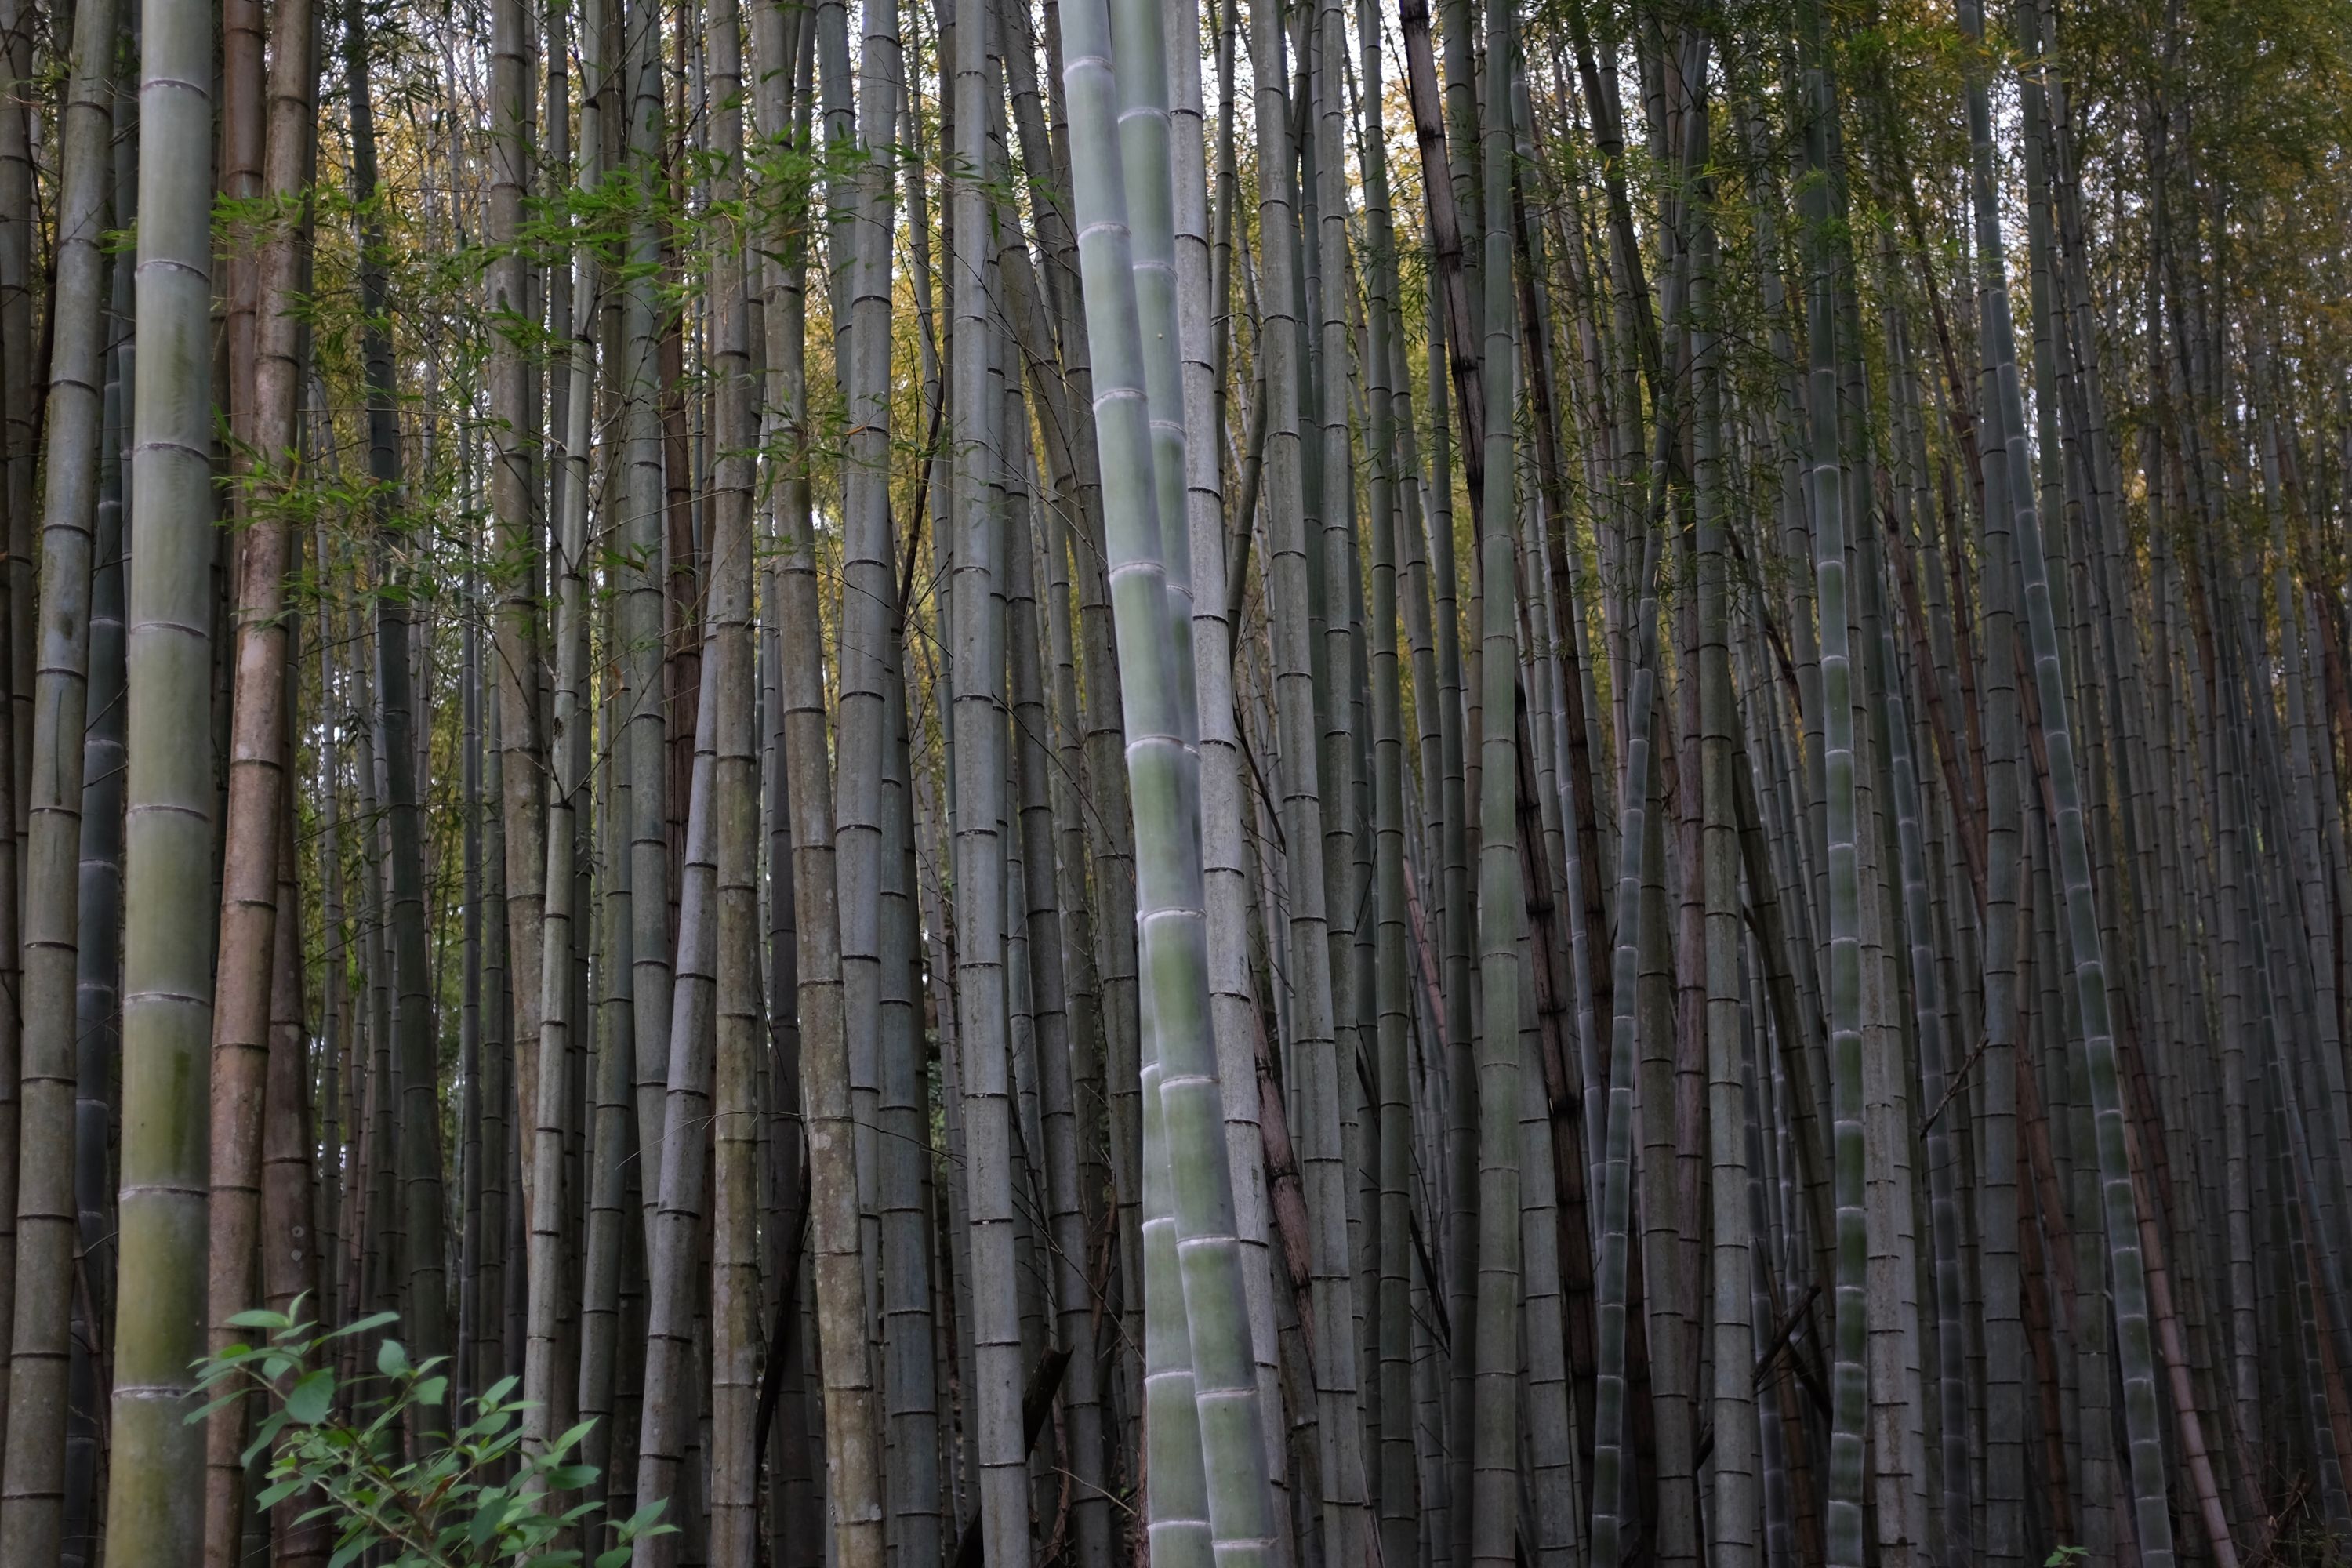 A very East Asian sort of bamboo forest.